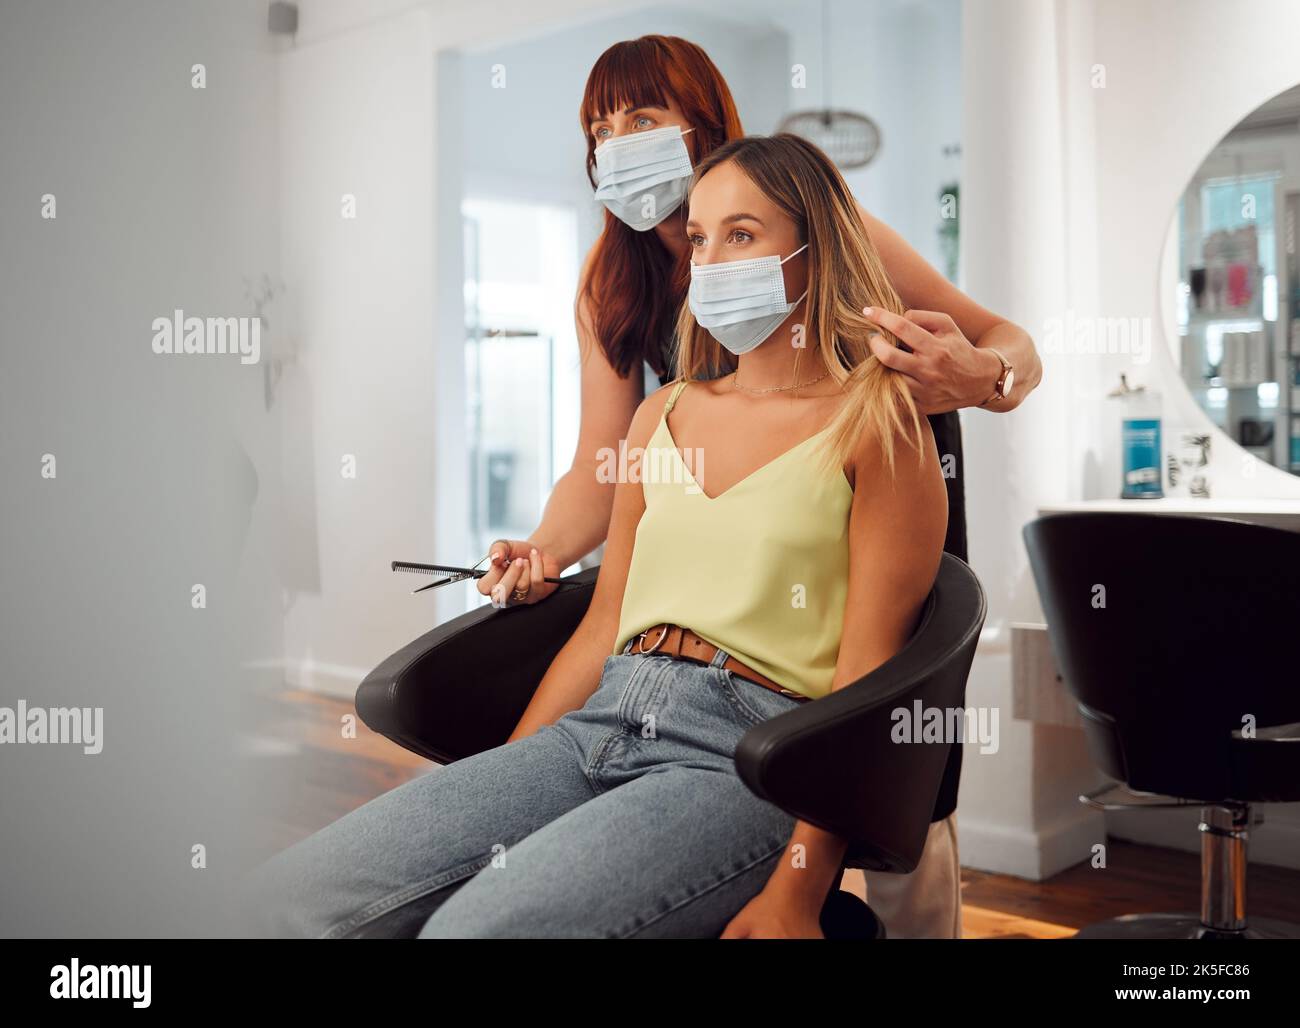 Covid, hairdresser and woman in hair salon getting haircut looking in mirror. Hairdressing, hair care and beauty business in covid 19 crisis. Woman Stock Photo